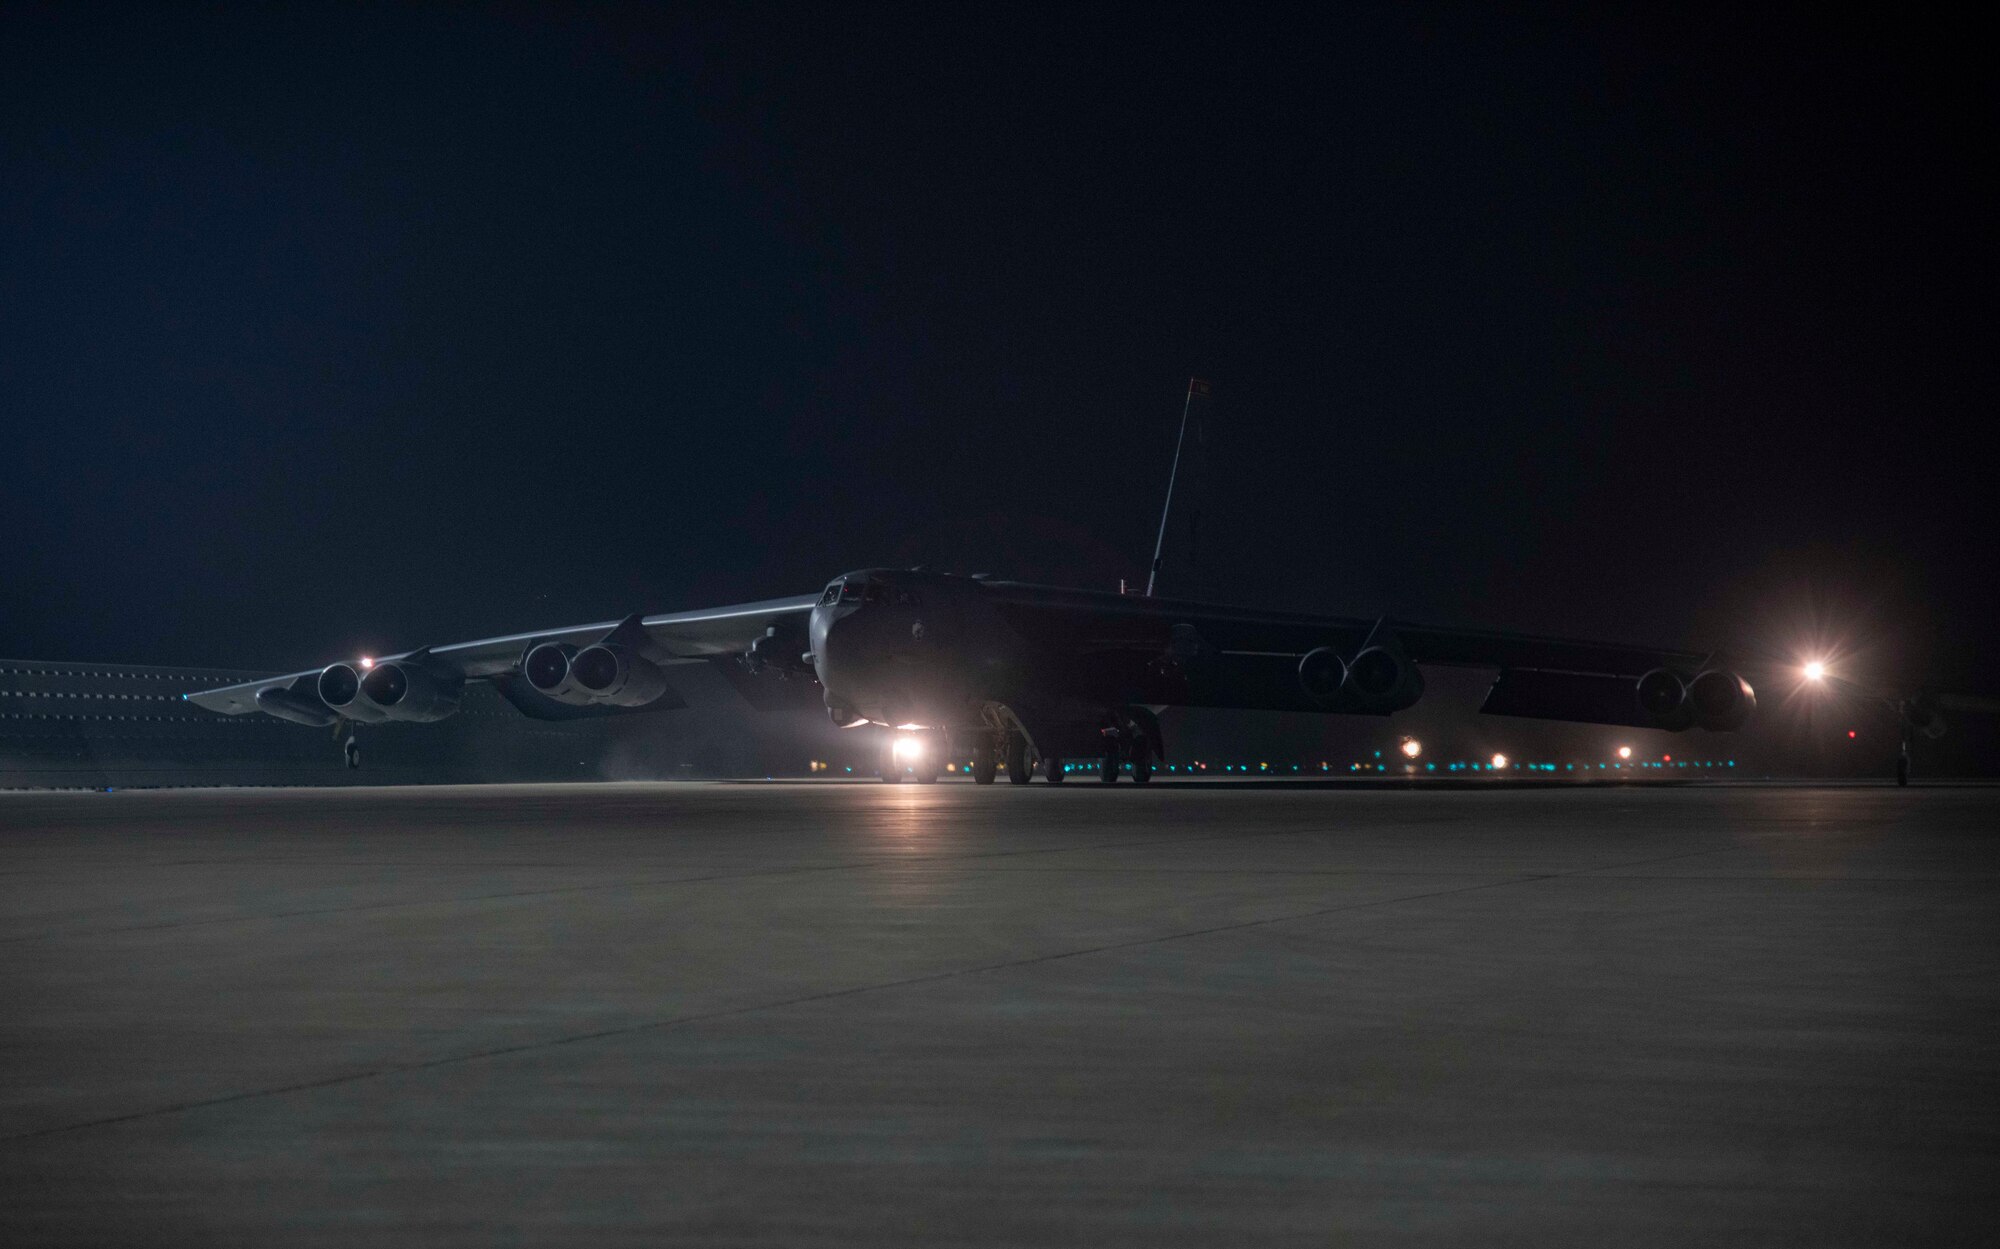 A B-52H Stratofortress assigned to the 5th Bomb Wing, Minot Air Force Base, North Dakota, arrives April 26, 2021, at Al Udeid Air Base, Qatar. Two B-52 aircraft arrived April 26, joining the additional B-52 bombers that arrived April 23. The bombers are deployed to protect U.S. and coalition forces as they conduct drawdown operations from Afghanistan. U.S. Central Command is committed to providing the necessary force protection to ensure the drawdown is conducted in a safe and orderly manner. (U.S. Air Force photo by Staff Sgt. Kylee Gardner)